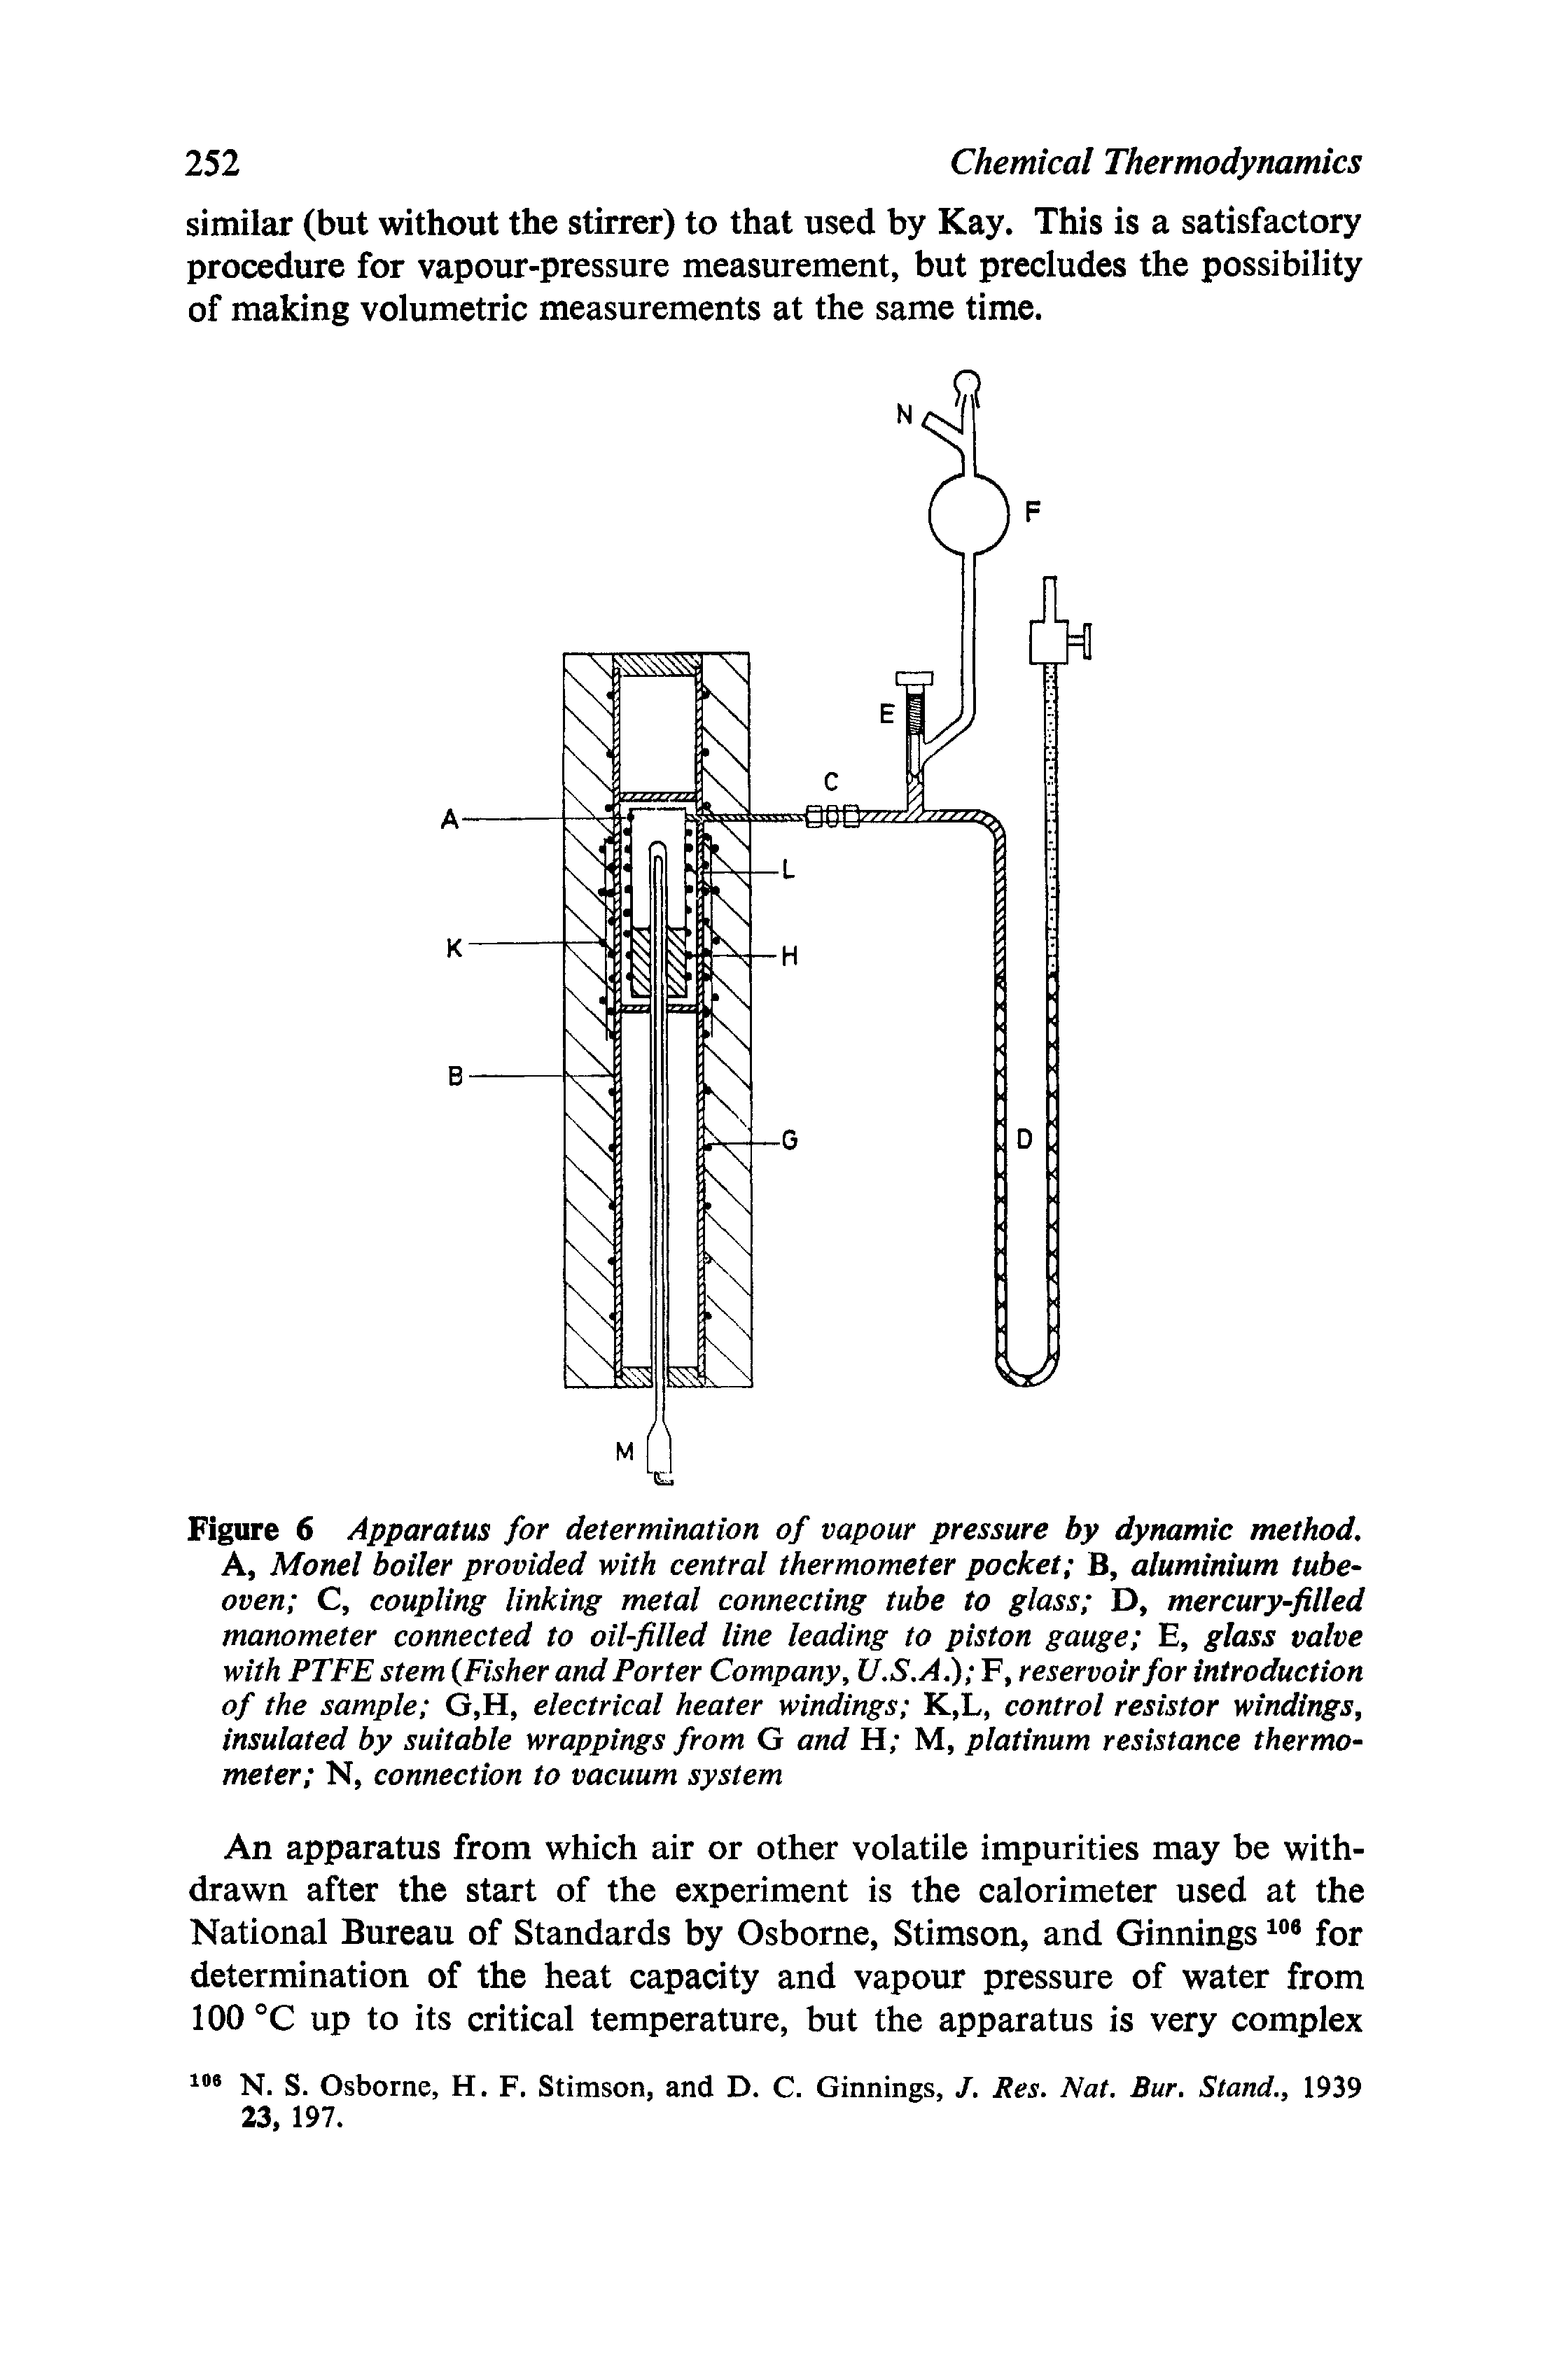 Figure 6 Apparatus for determination of vapour pressure by dynamic method, A, Monel boiler provided with central thermometer pocket B, aluminium tube-oven C, coupling linking metal connecting tube to glass D, mercury-filled manometer connected to oil-filled line leading to piston gauge E, glass valve with PTFE stem Fisher and Porter Company, U.S.A.) F, reservoir for introduction of the sample G,H, electrical heater windings K,L, control resistor windings, insulated by suitable wrappings from G and H M, platinum resistance thermometer N, connection to vacuum system...